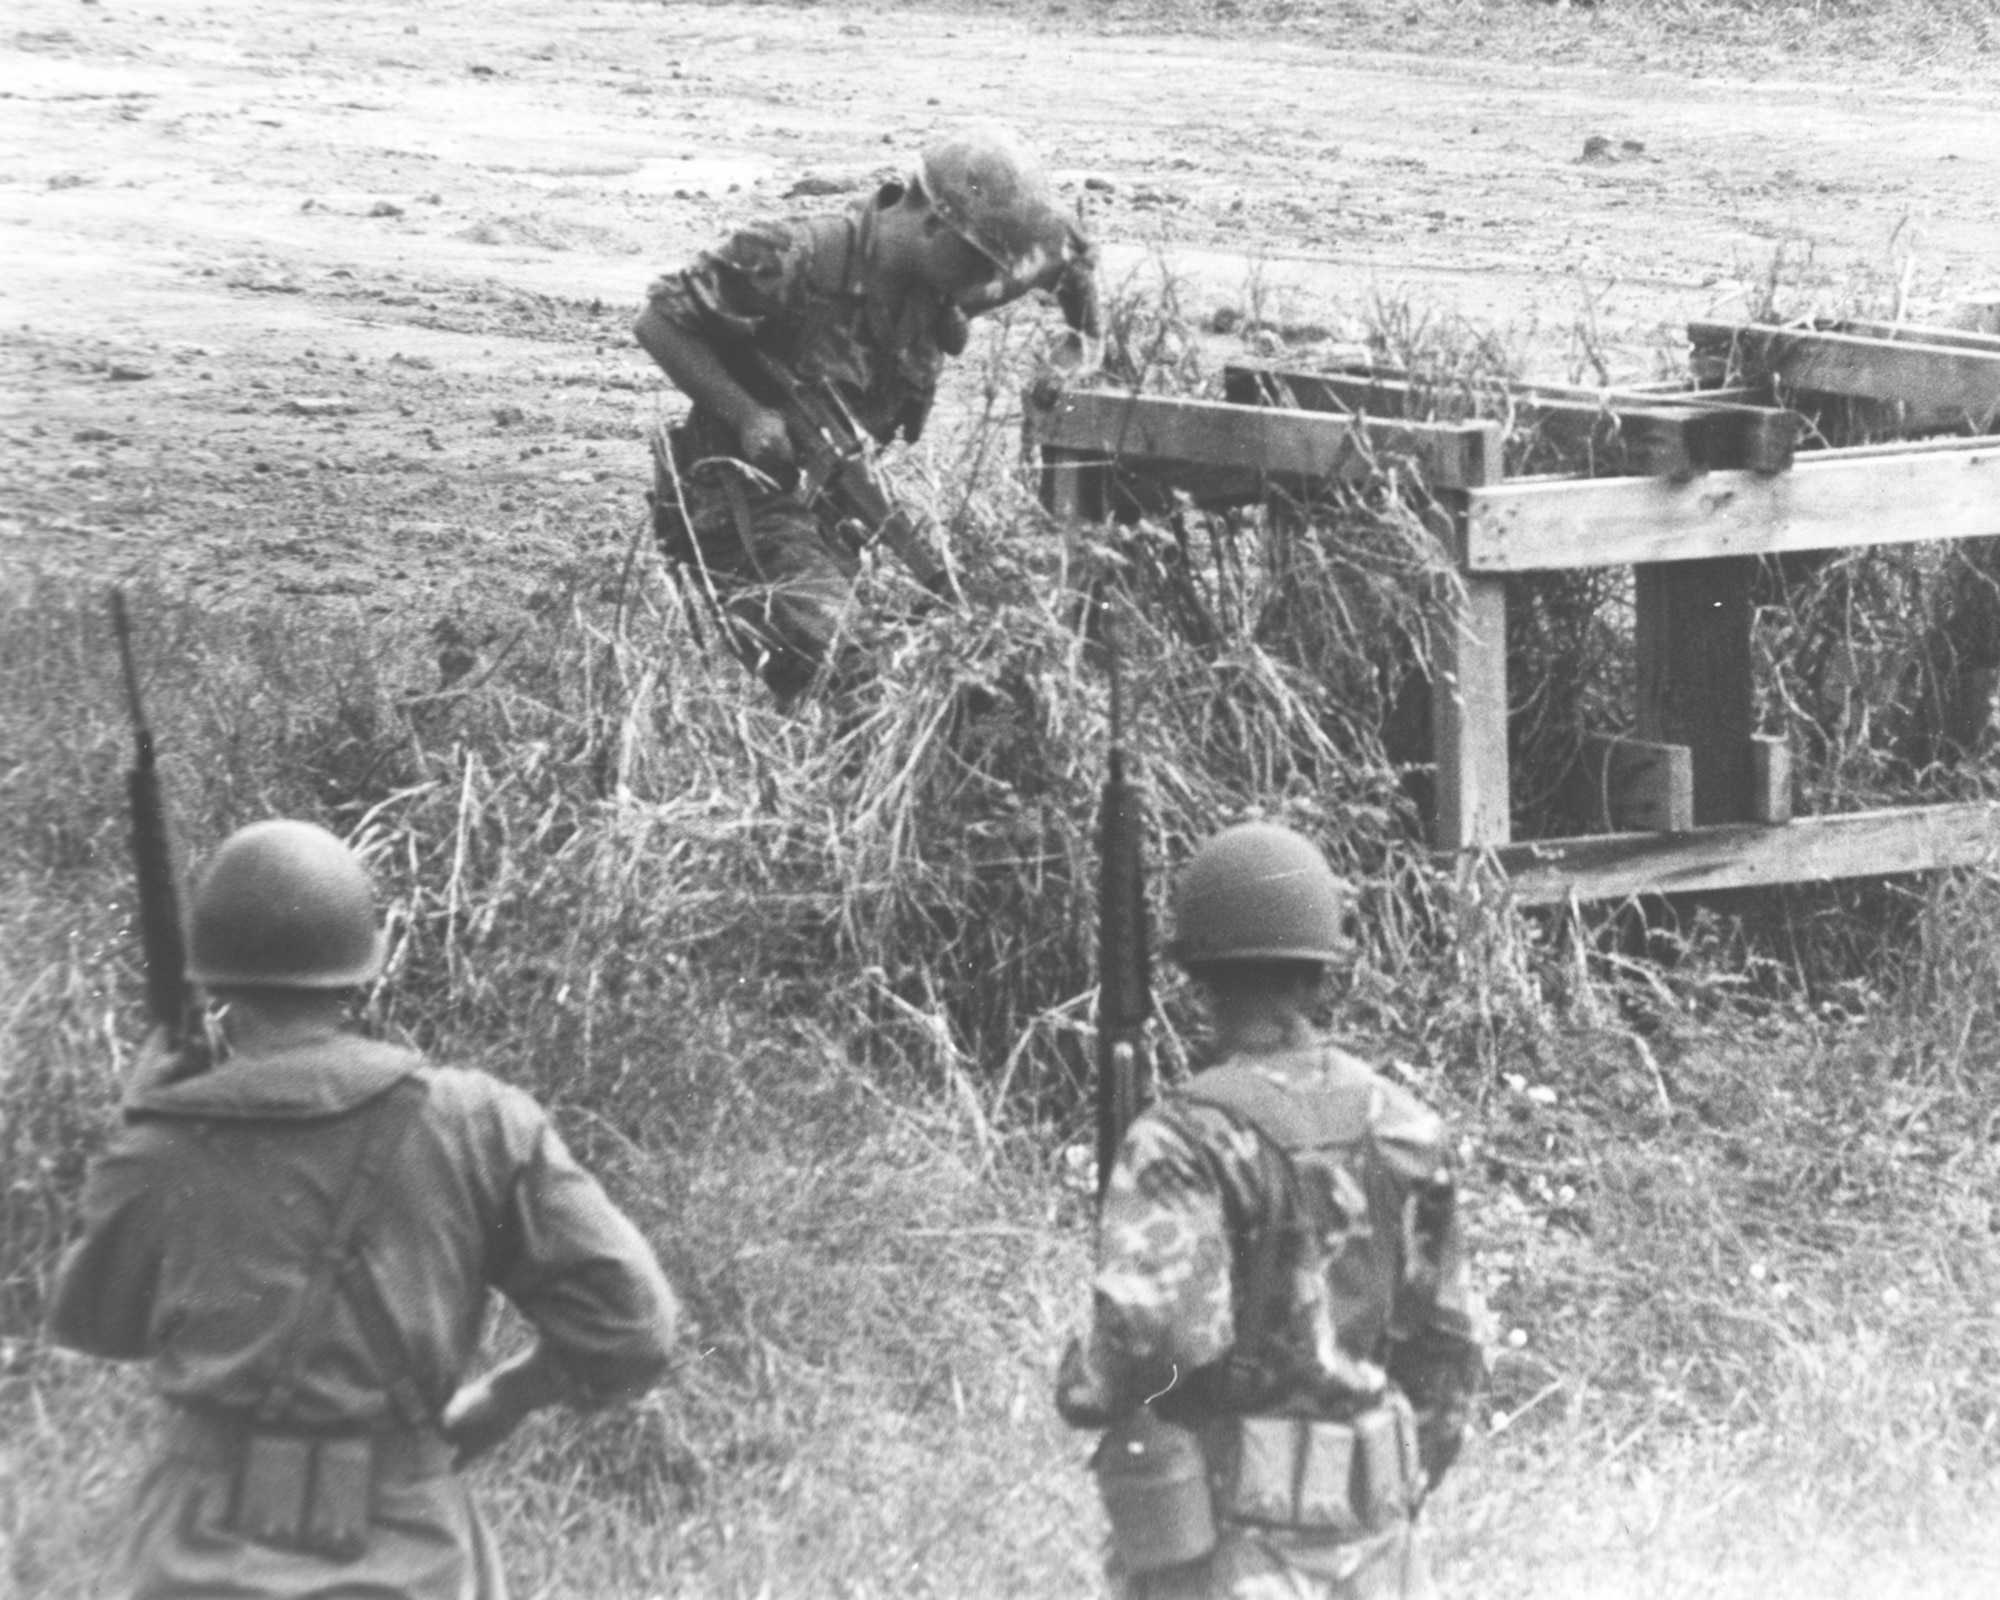 Air Police search for remaining enemy troops the morning after an attack on Tan Son Nhut in December 1966. (Images courtesy of the Security Forces Museum).